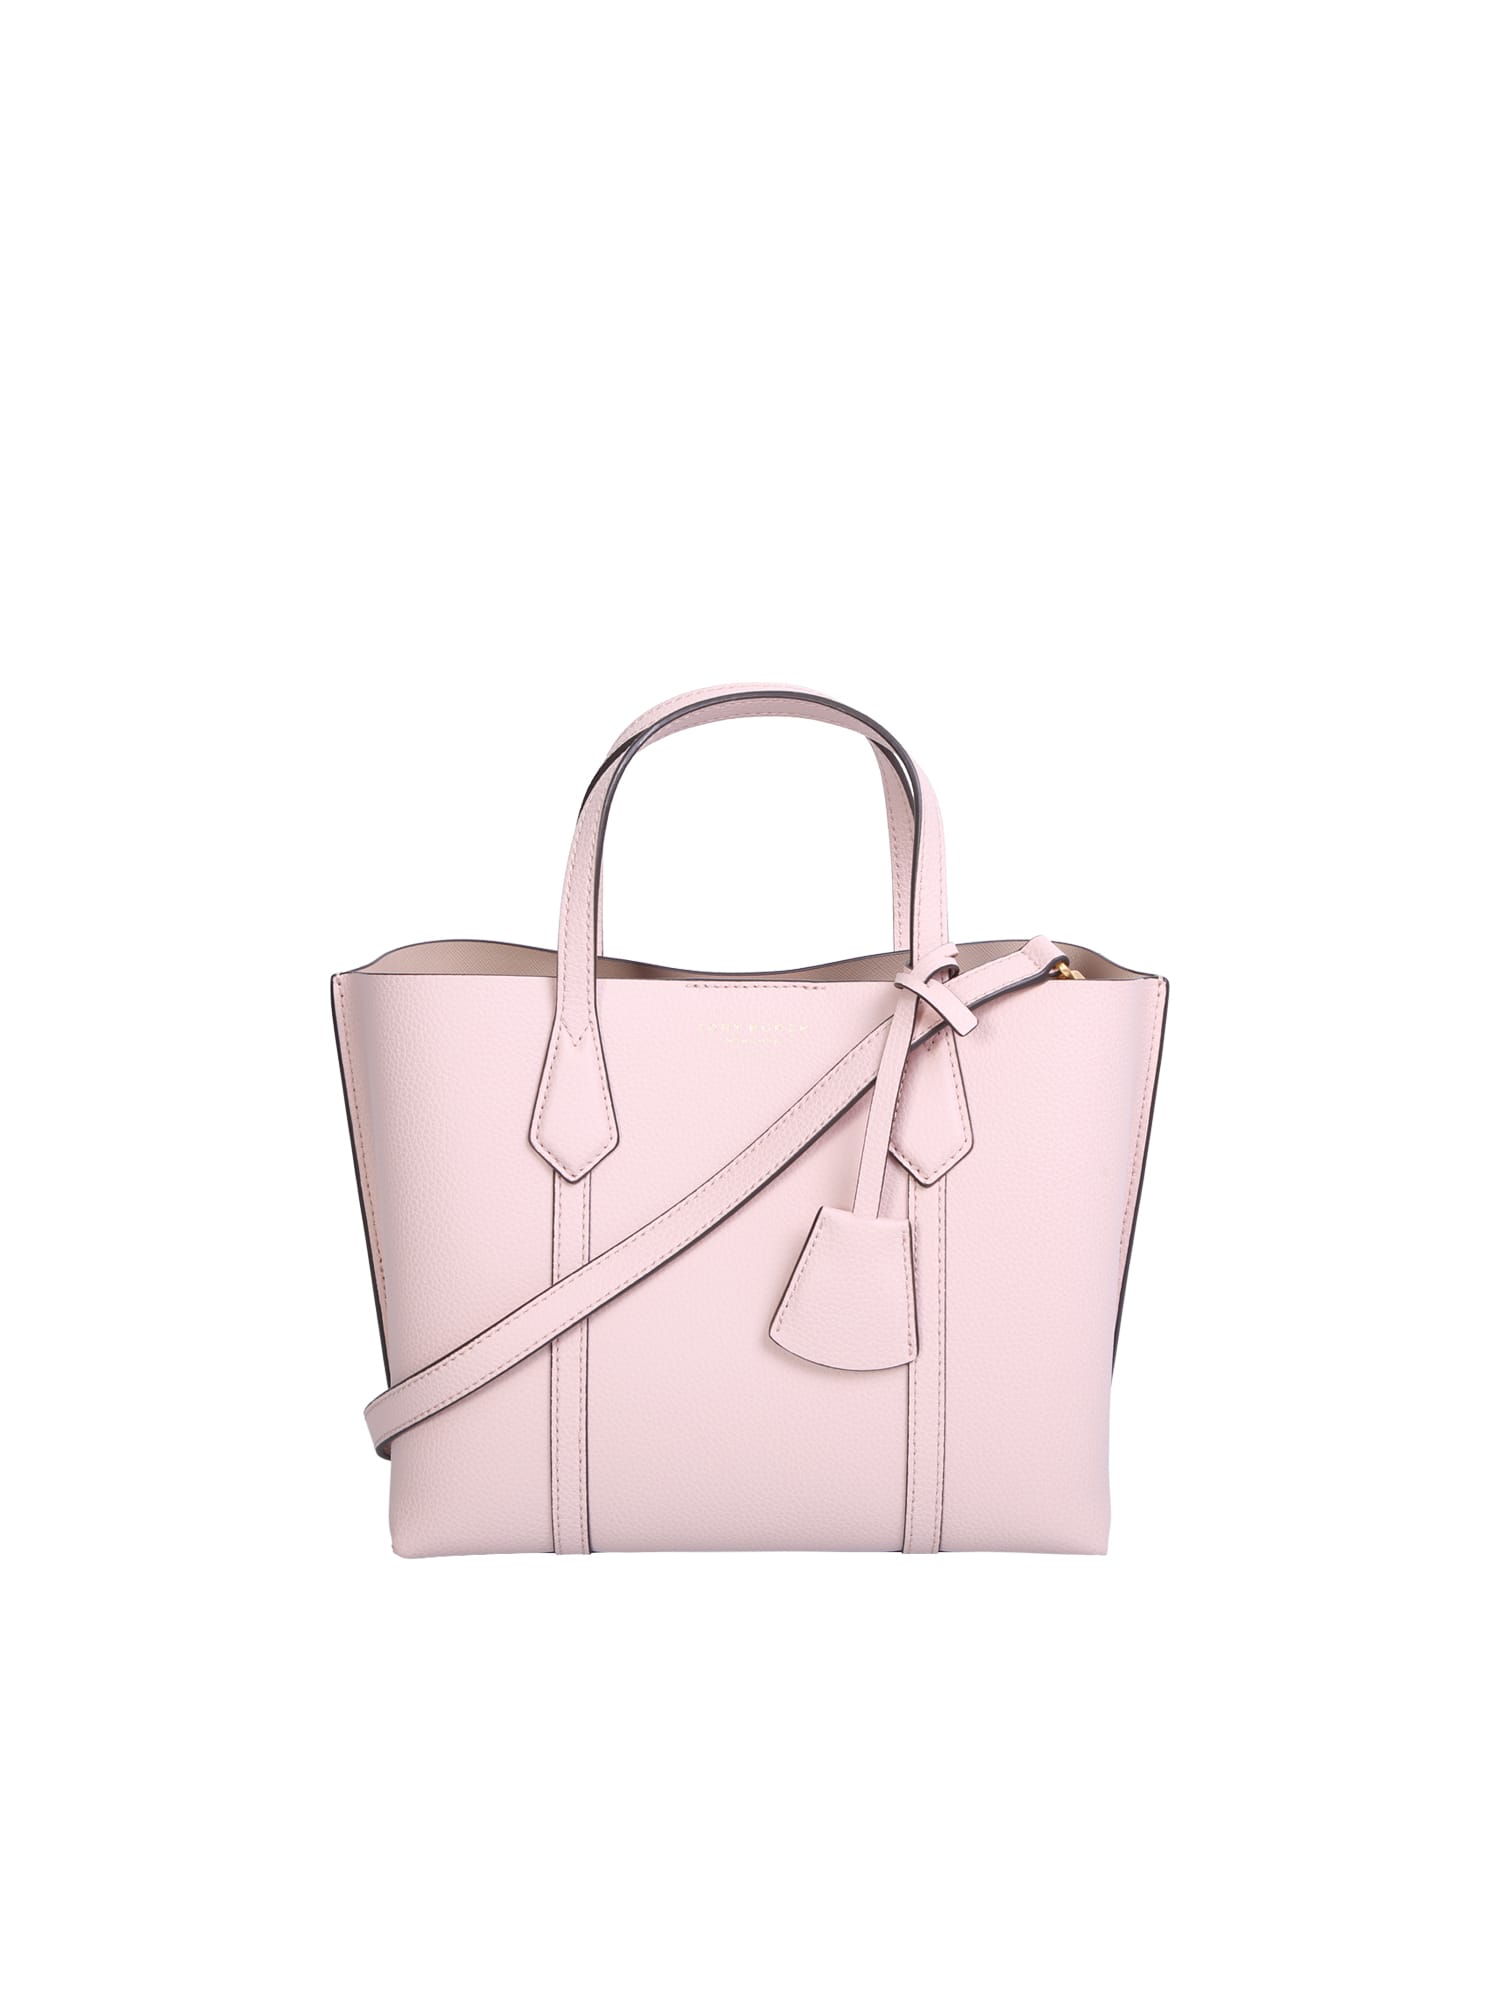 TORY BURCH PERRY SMALL PINK BAG